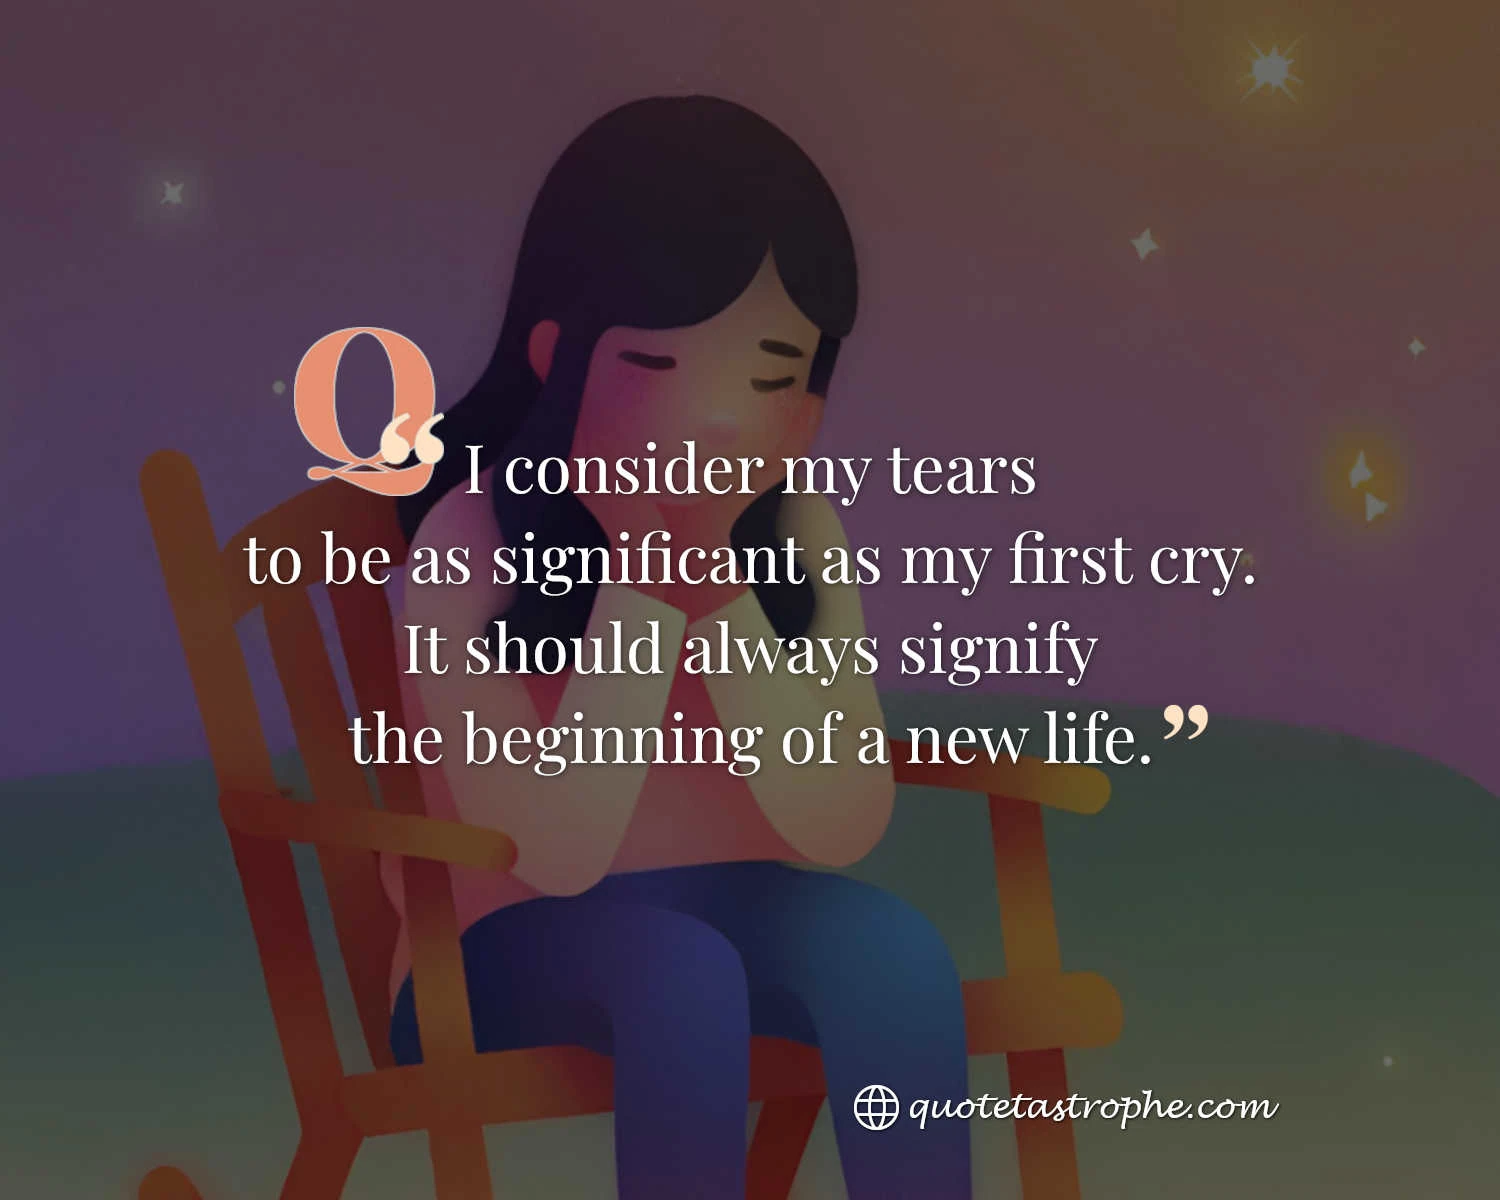 I Consider My Tears to be as Significant as My First Cry